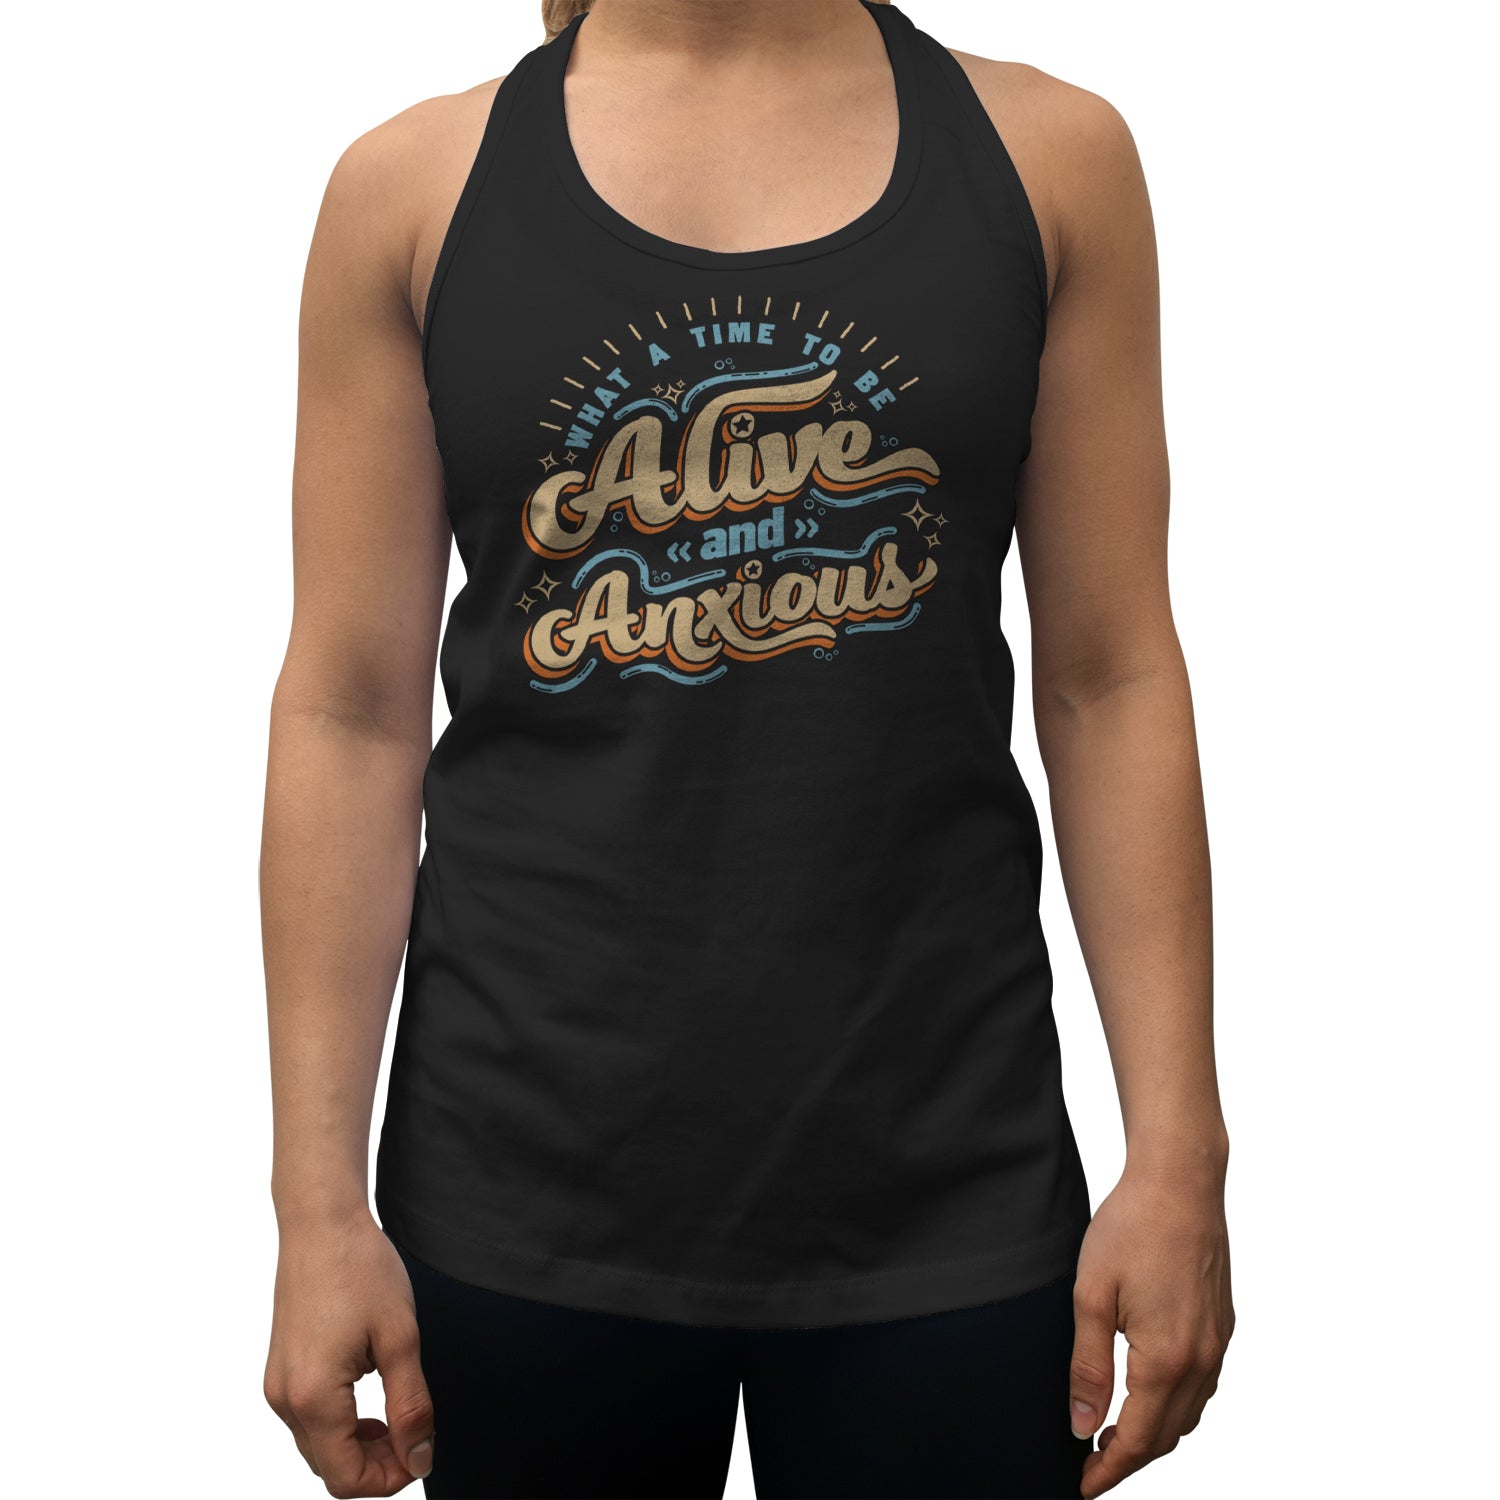 Women's What a Time to be Alive and Anxious Racerback Tank Top